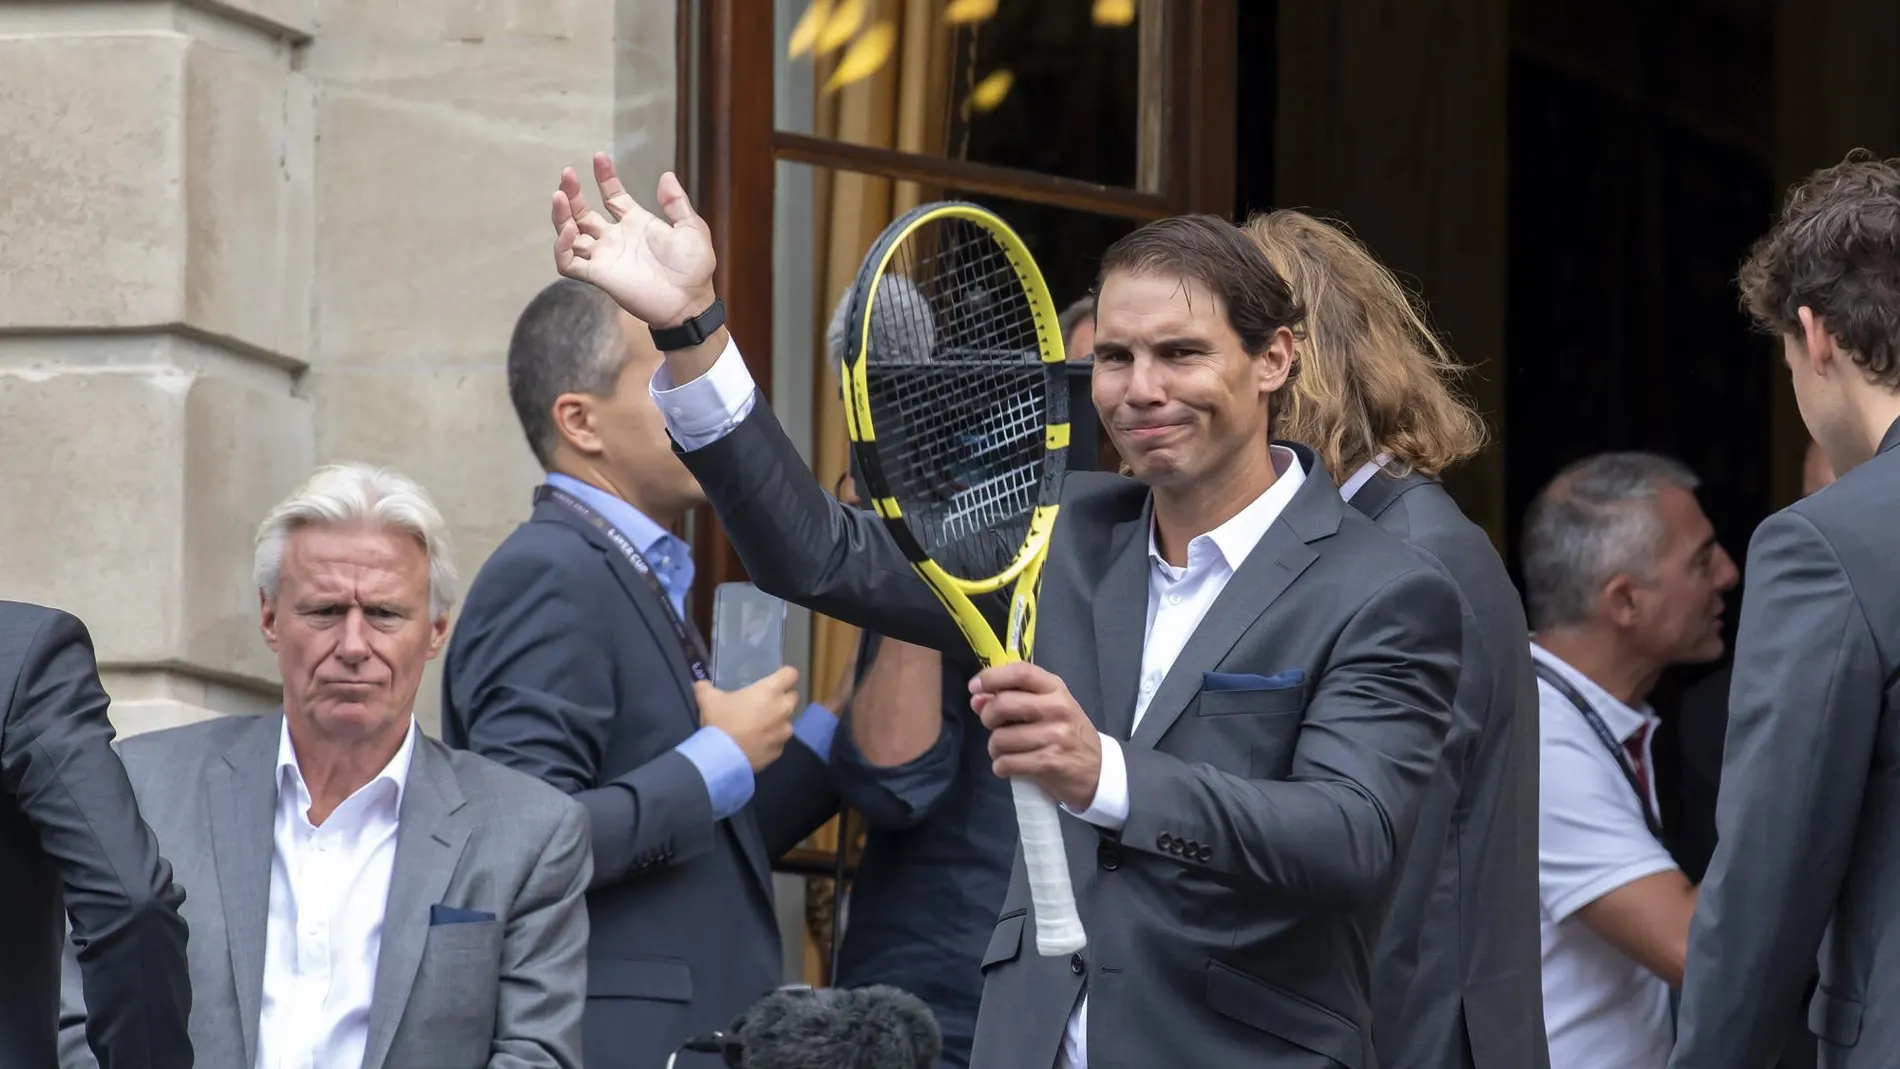 [Borg (L) and Rafael Nadal (R) greet the fans, during the official welcome ceremony together with other]